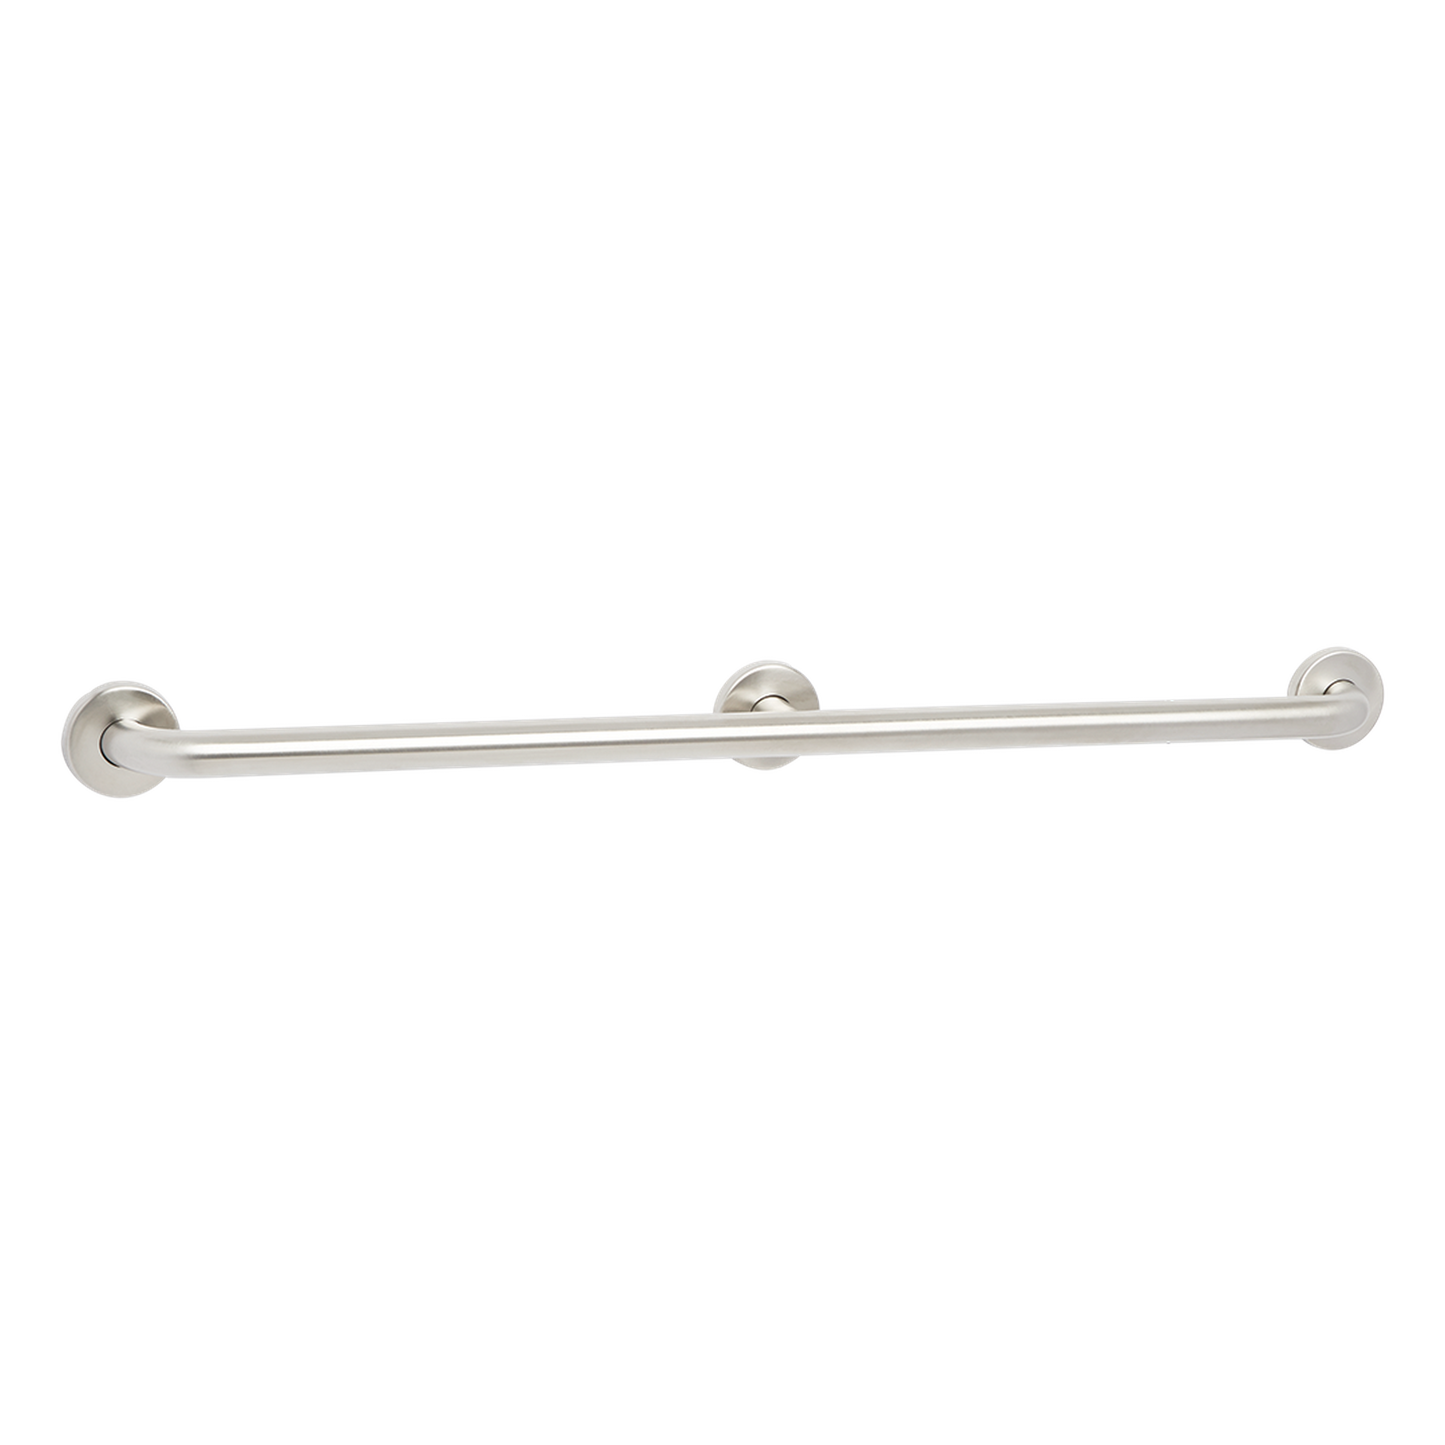 Seachrome Signature Series 60" Satin Stainless Steel 1.25" Bar Diameter Exposed Flange Straight Grab Bar With Center Post